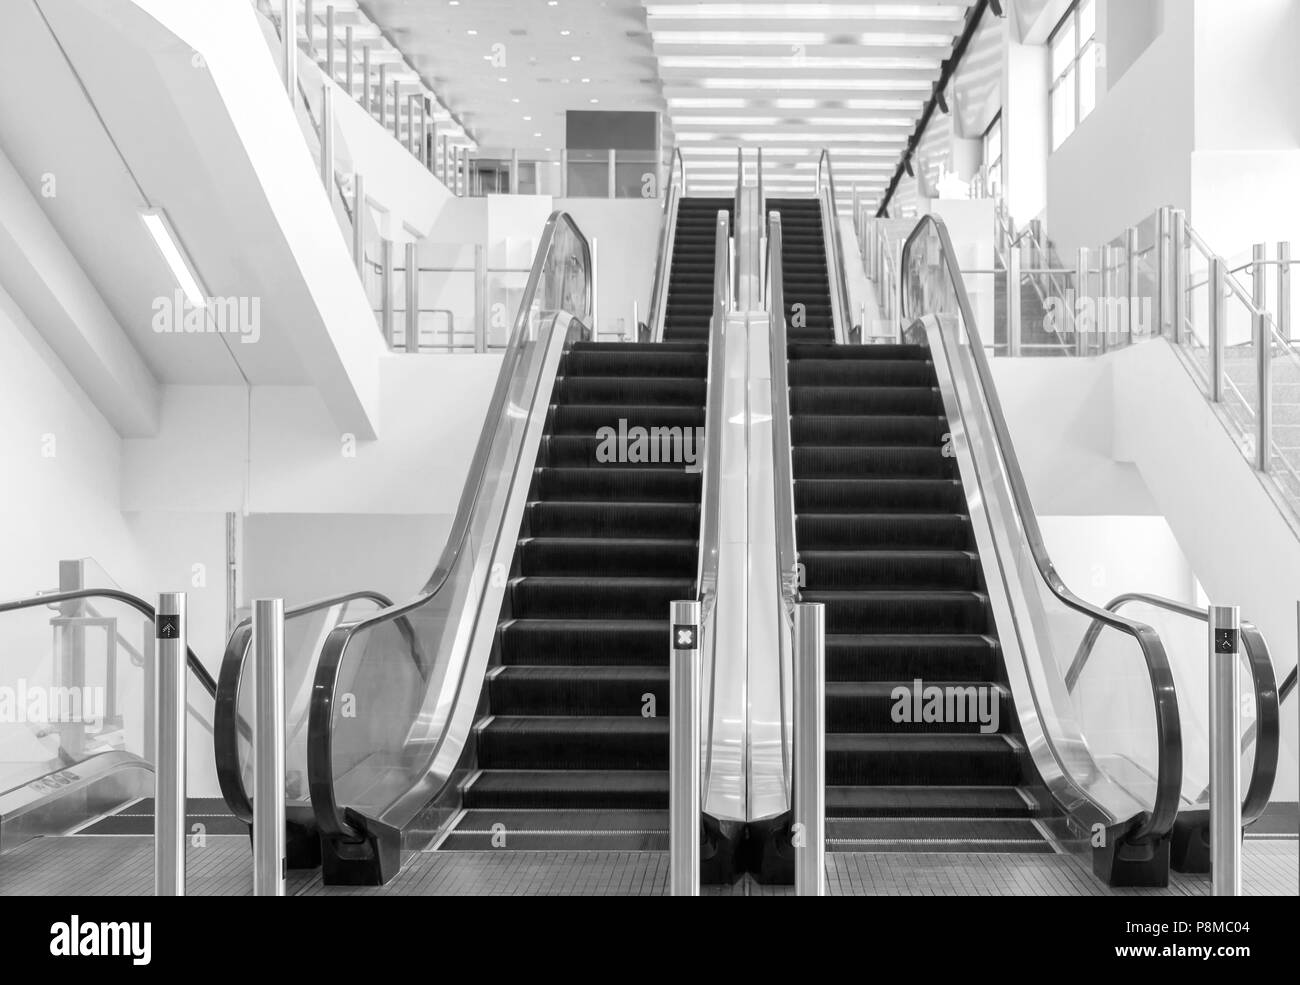 View of empty escalator in shopping mall. Black and white tone. Stock Photo